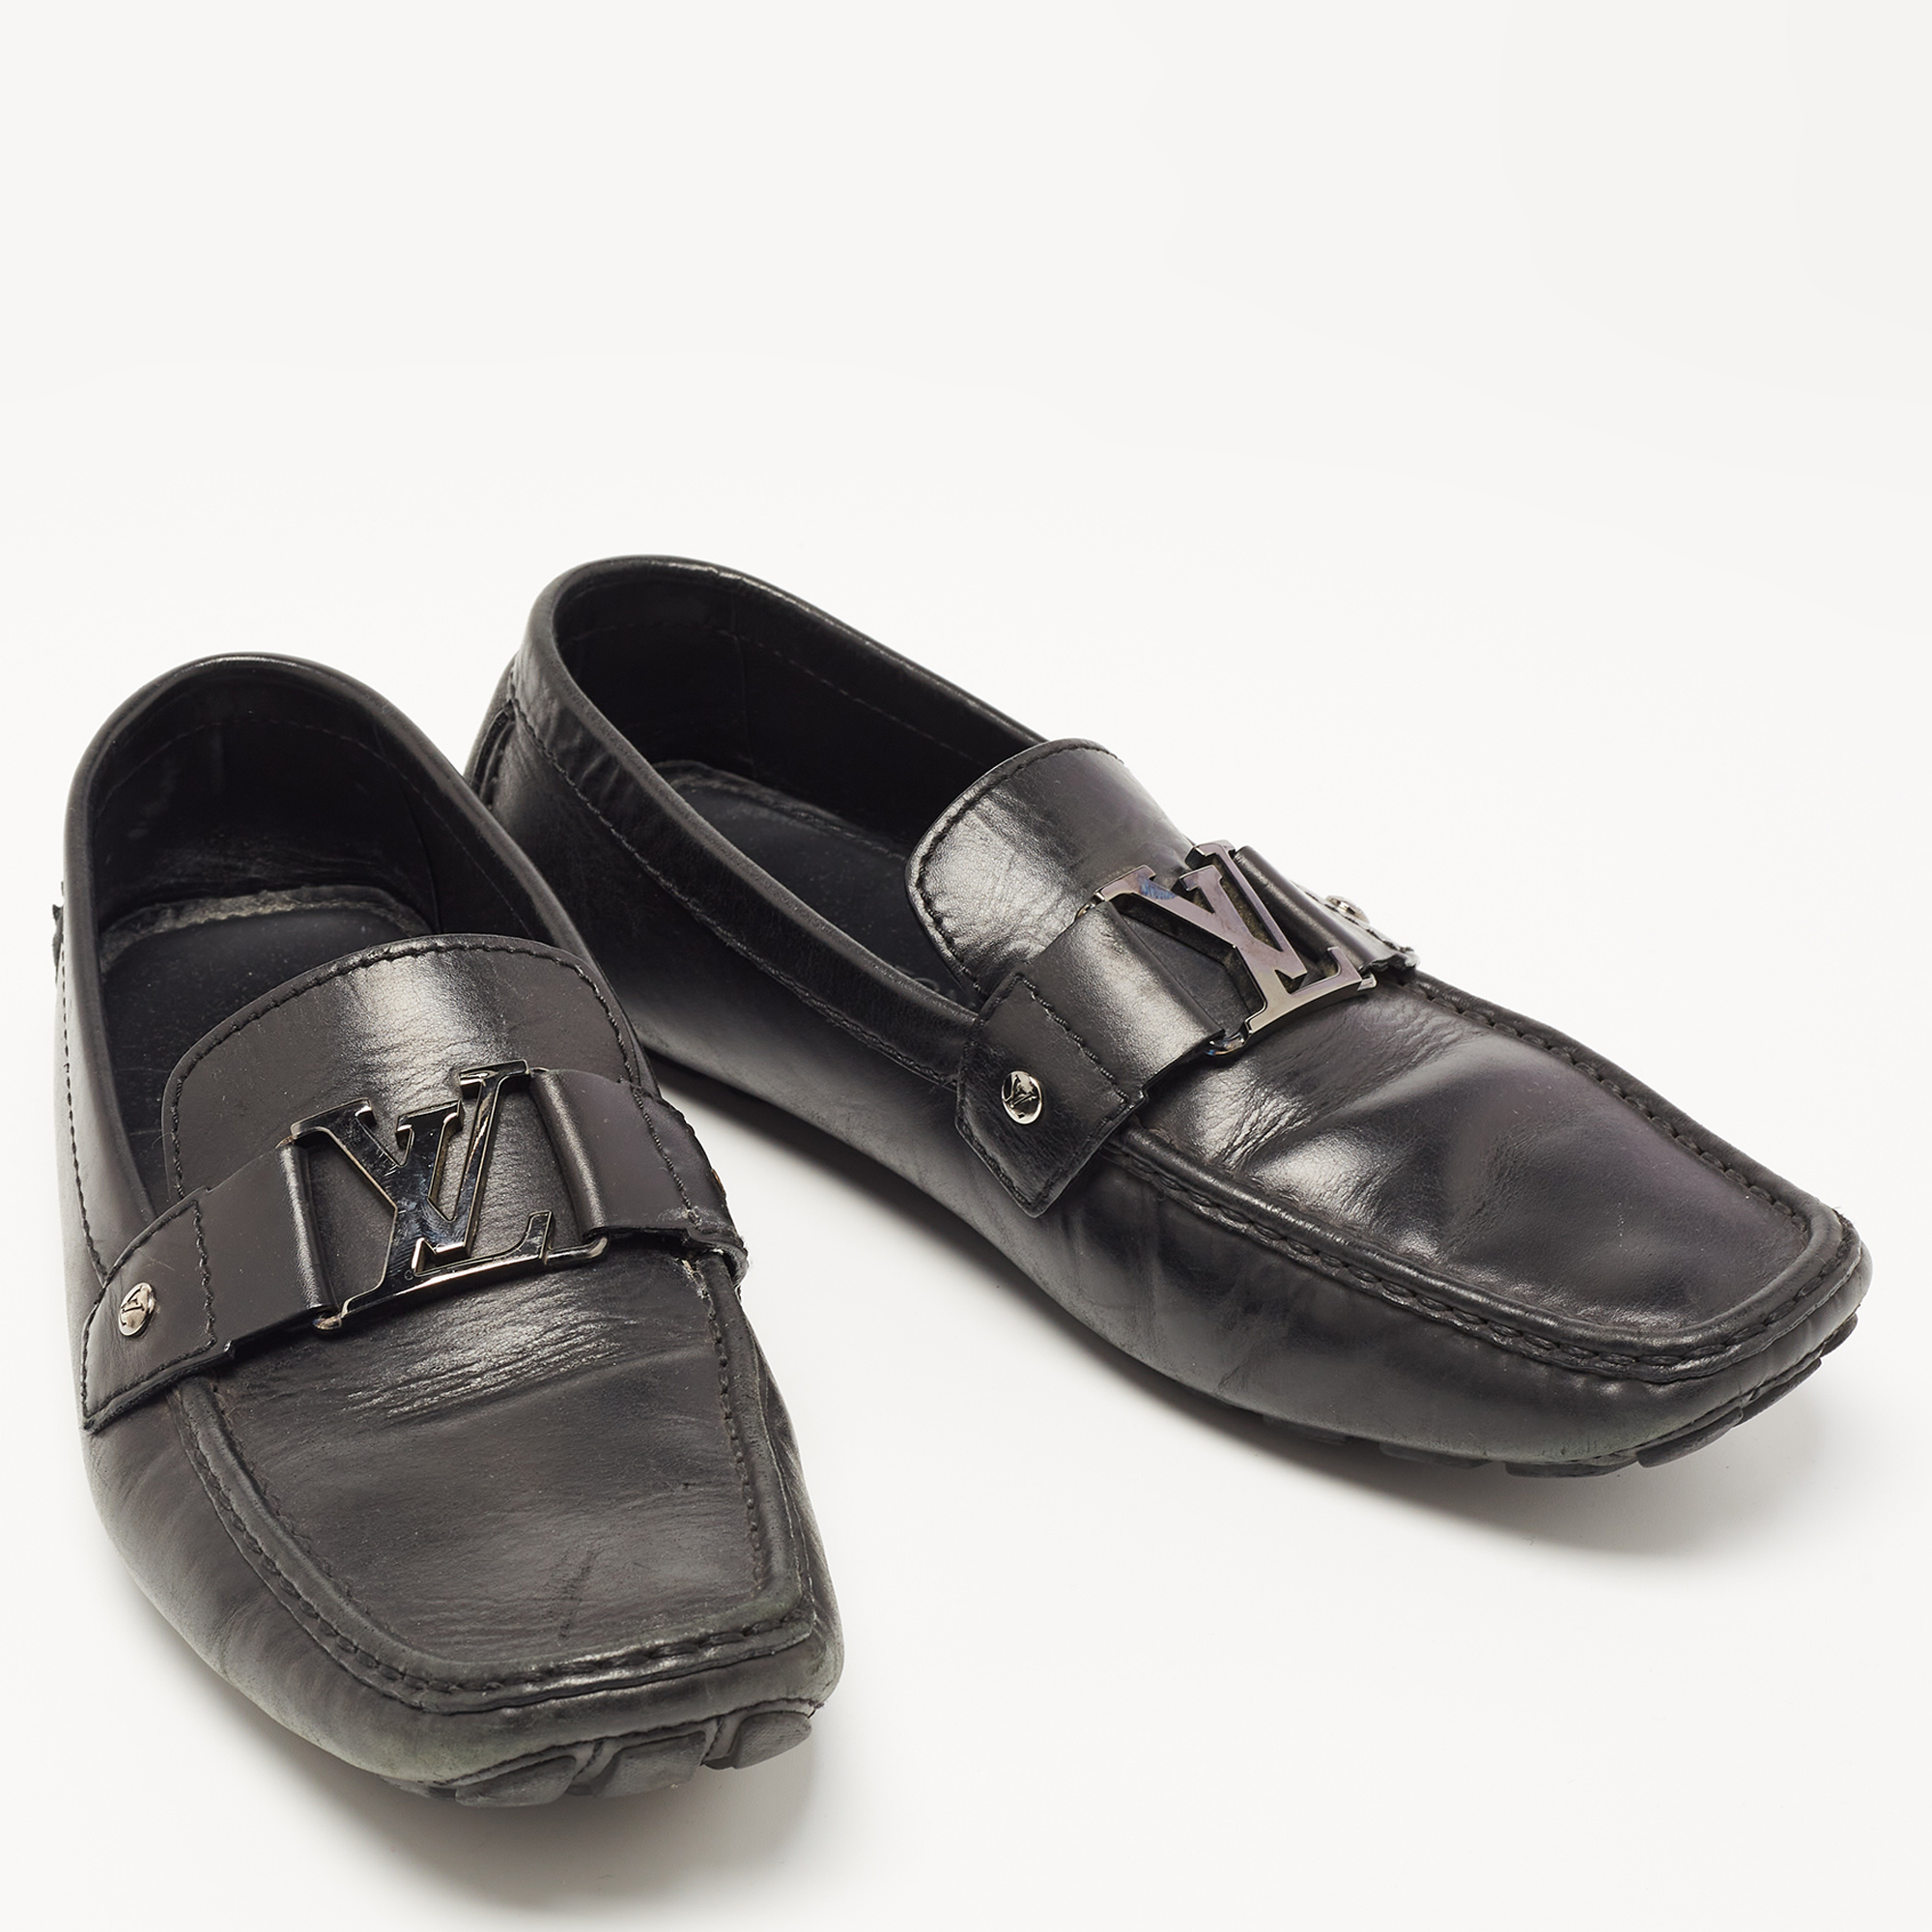 Louis Vuitton Black Leather Monte Carlo Loafers Size 43